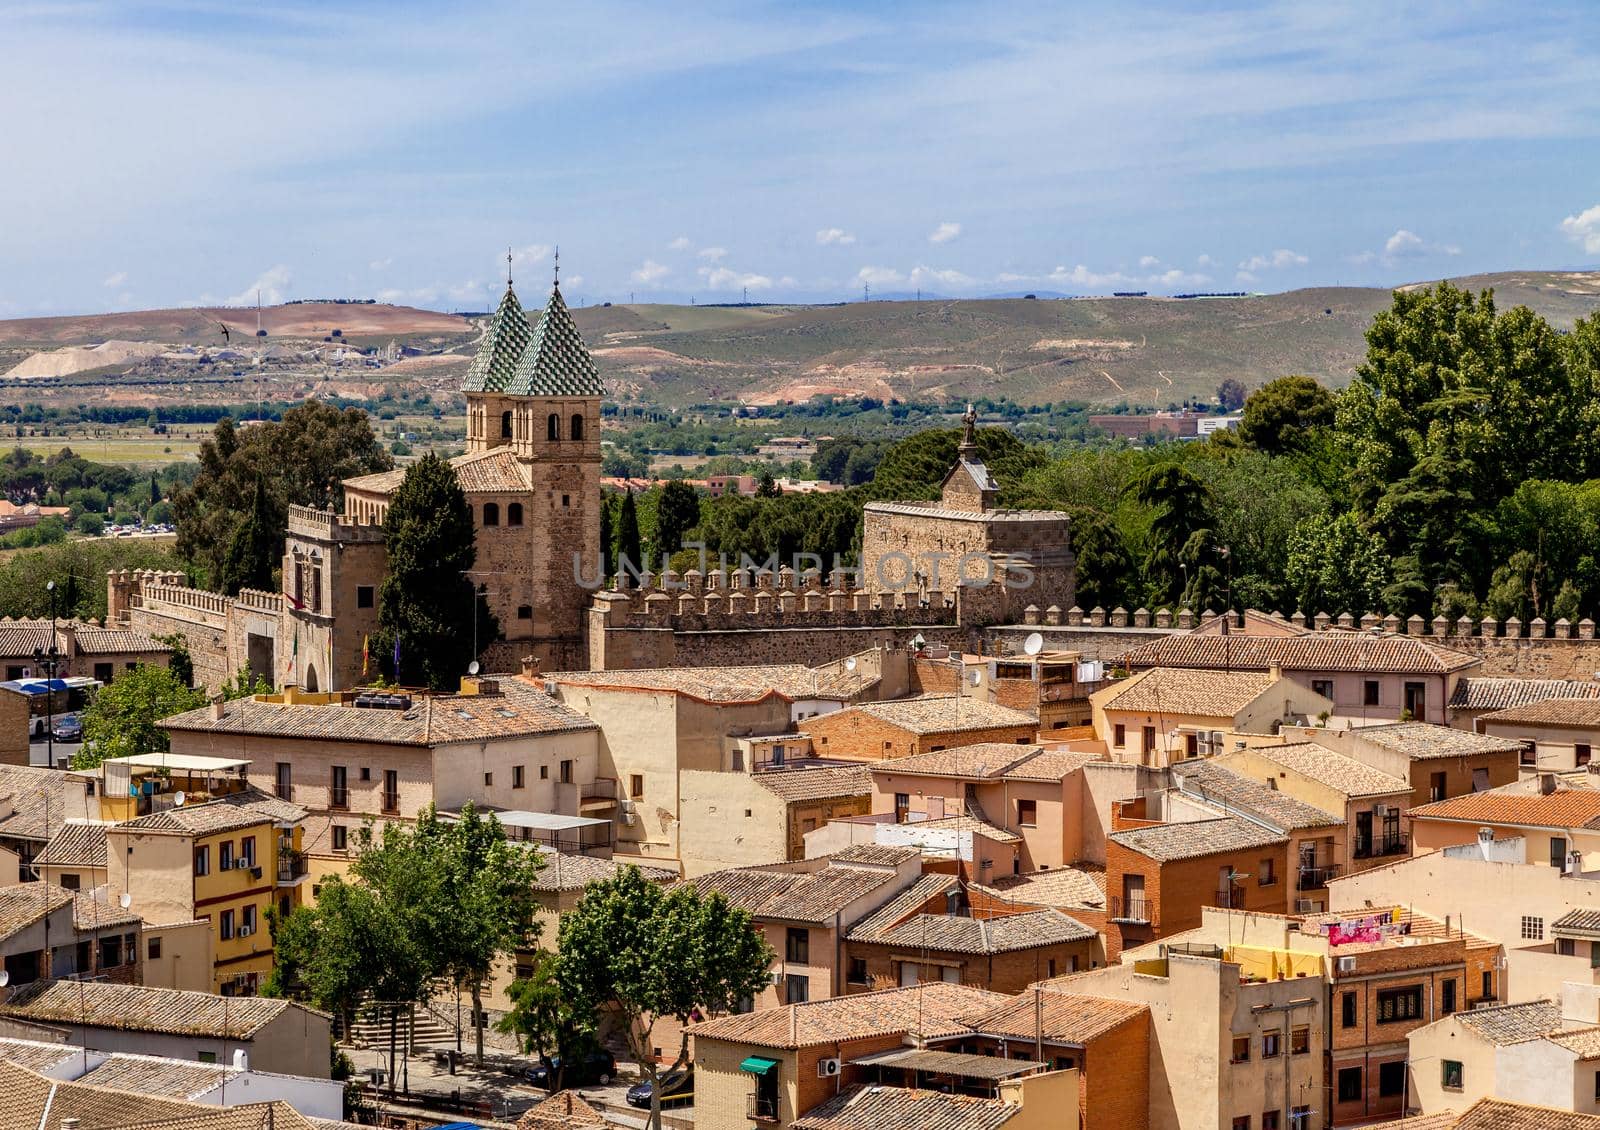 Old town of the medieval city of Toledo, Spain